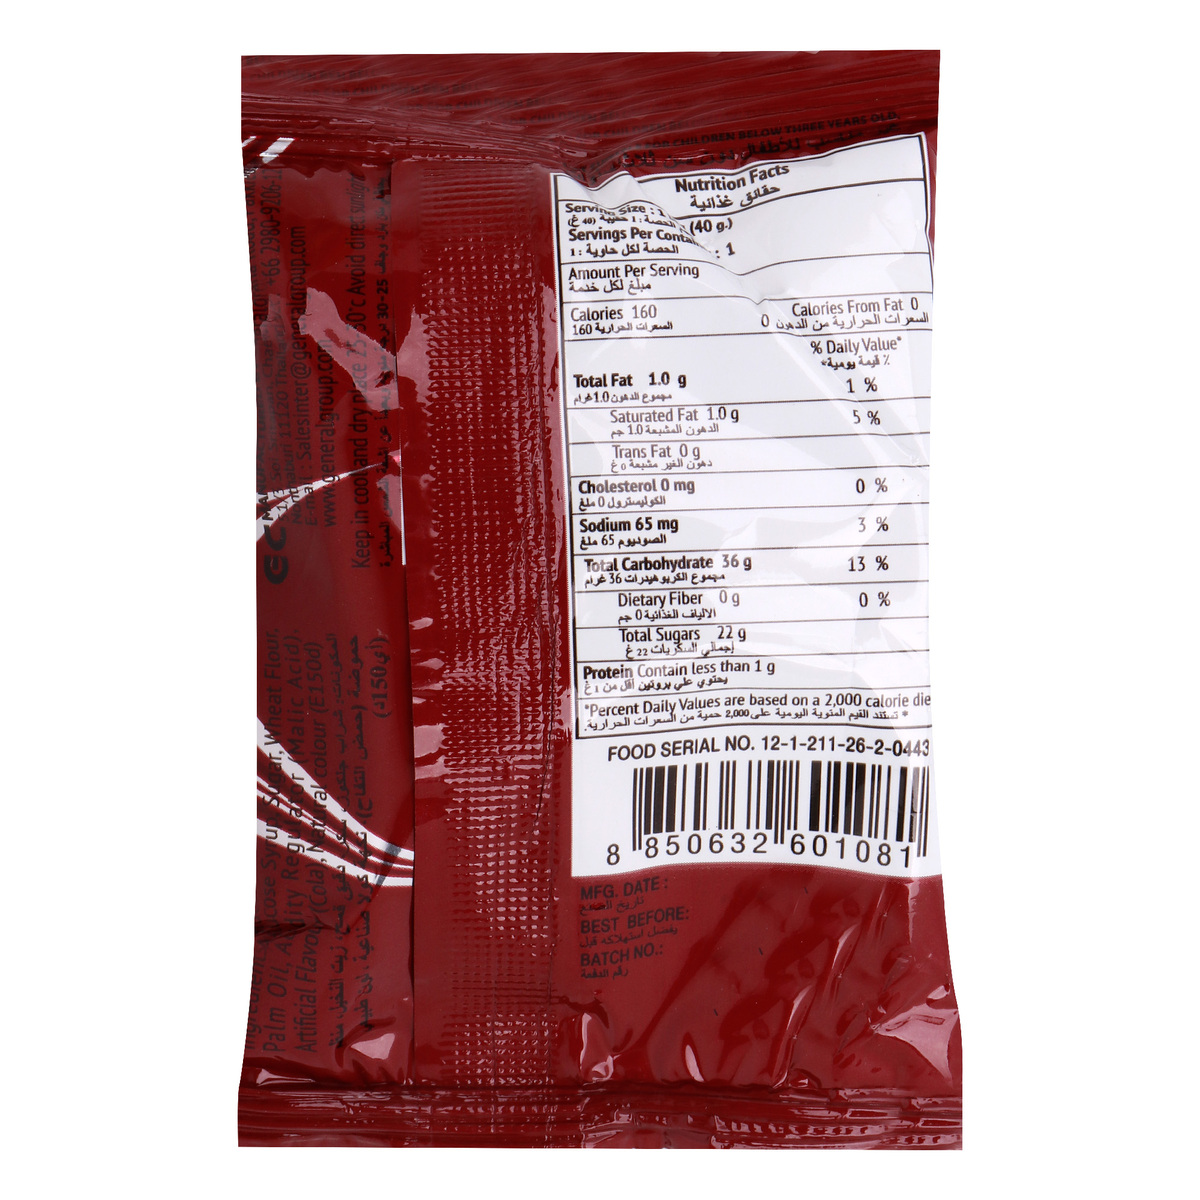 Extreme Frit-C Cola Gummy Candy 40g